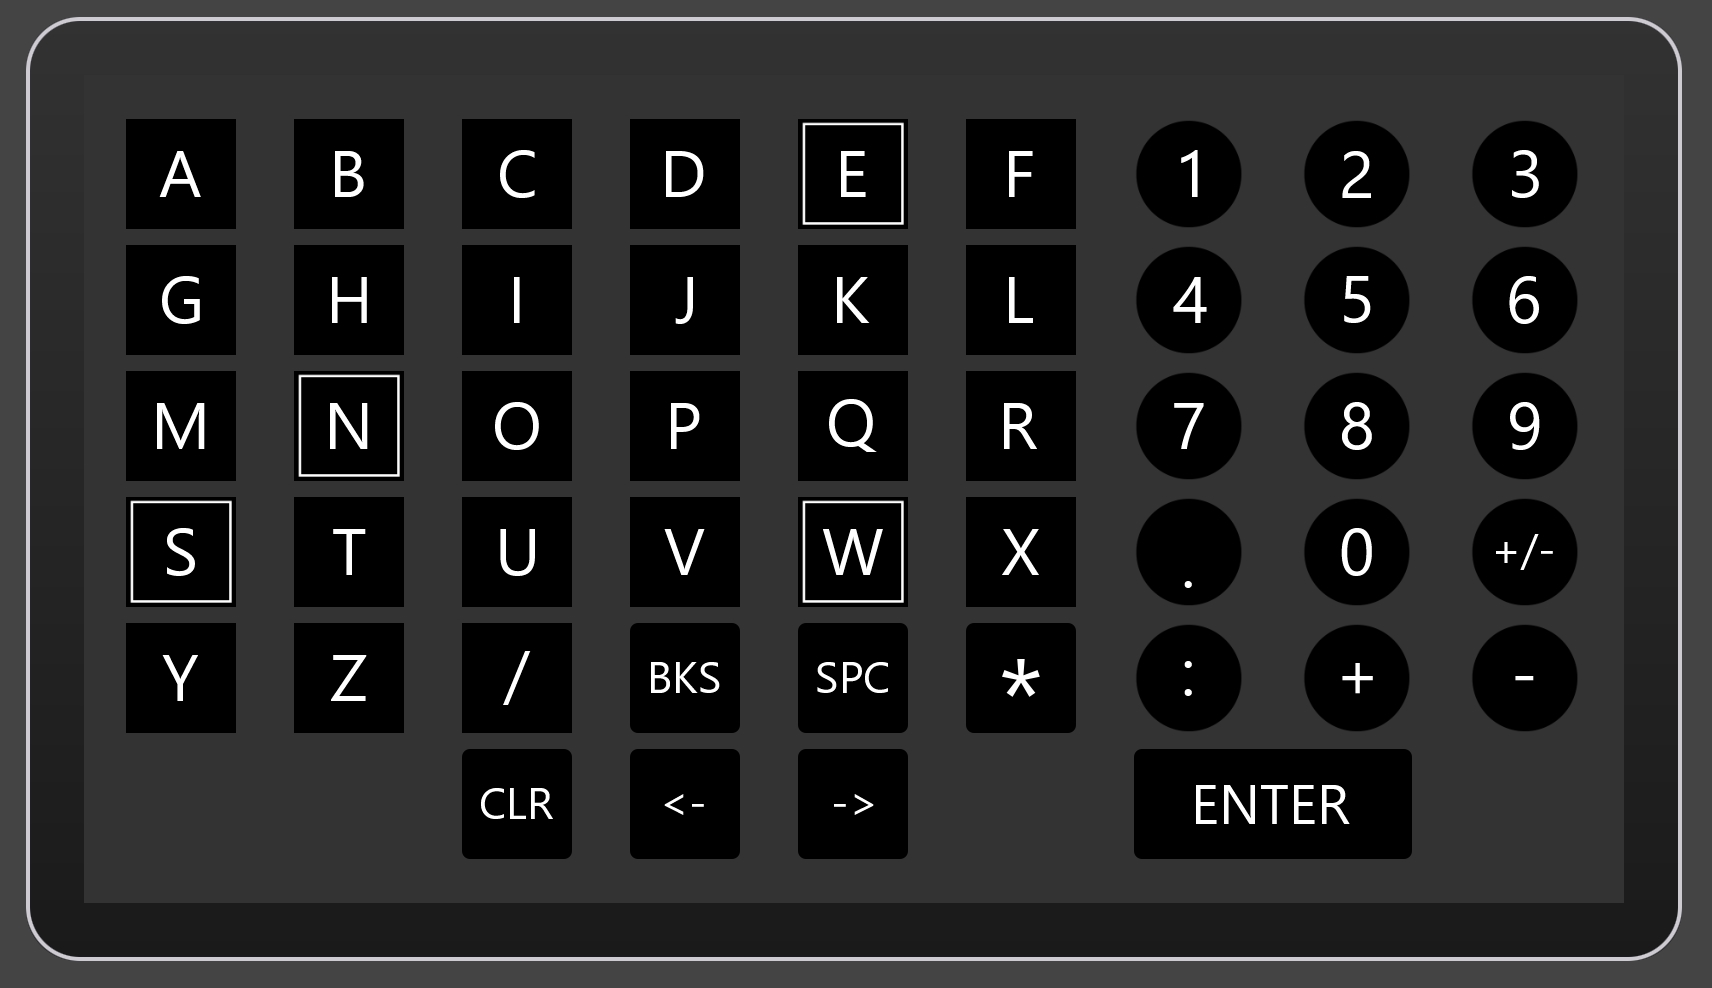 AH-64D Keyboard Unit Page for Touch Portal v1.0